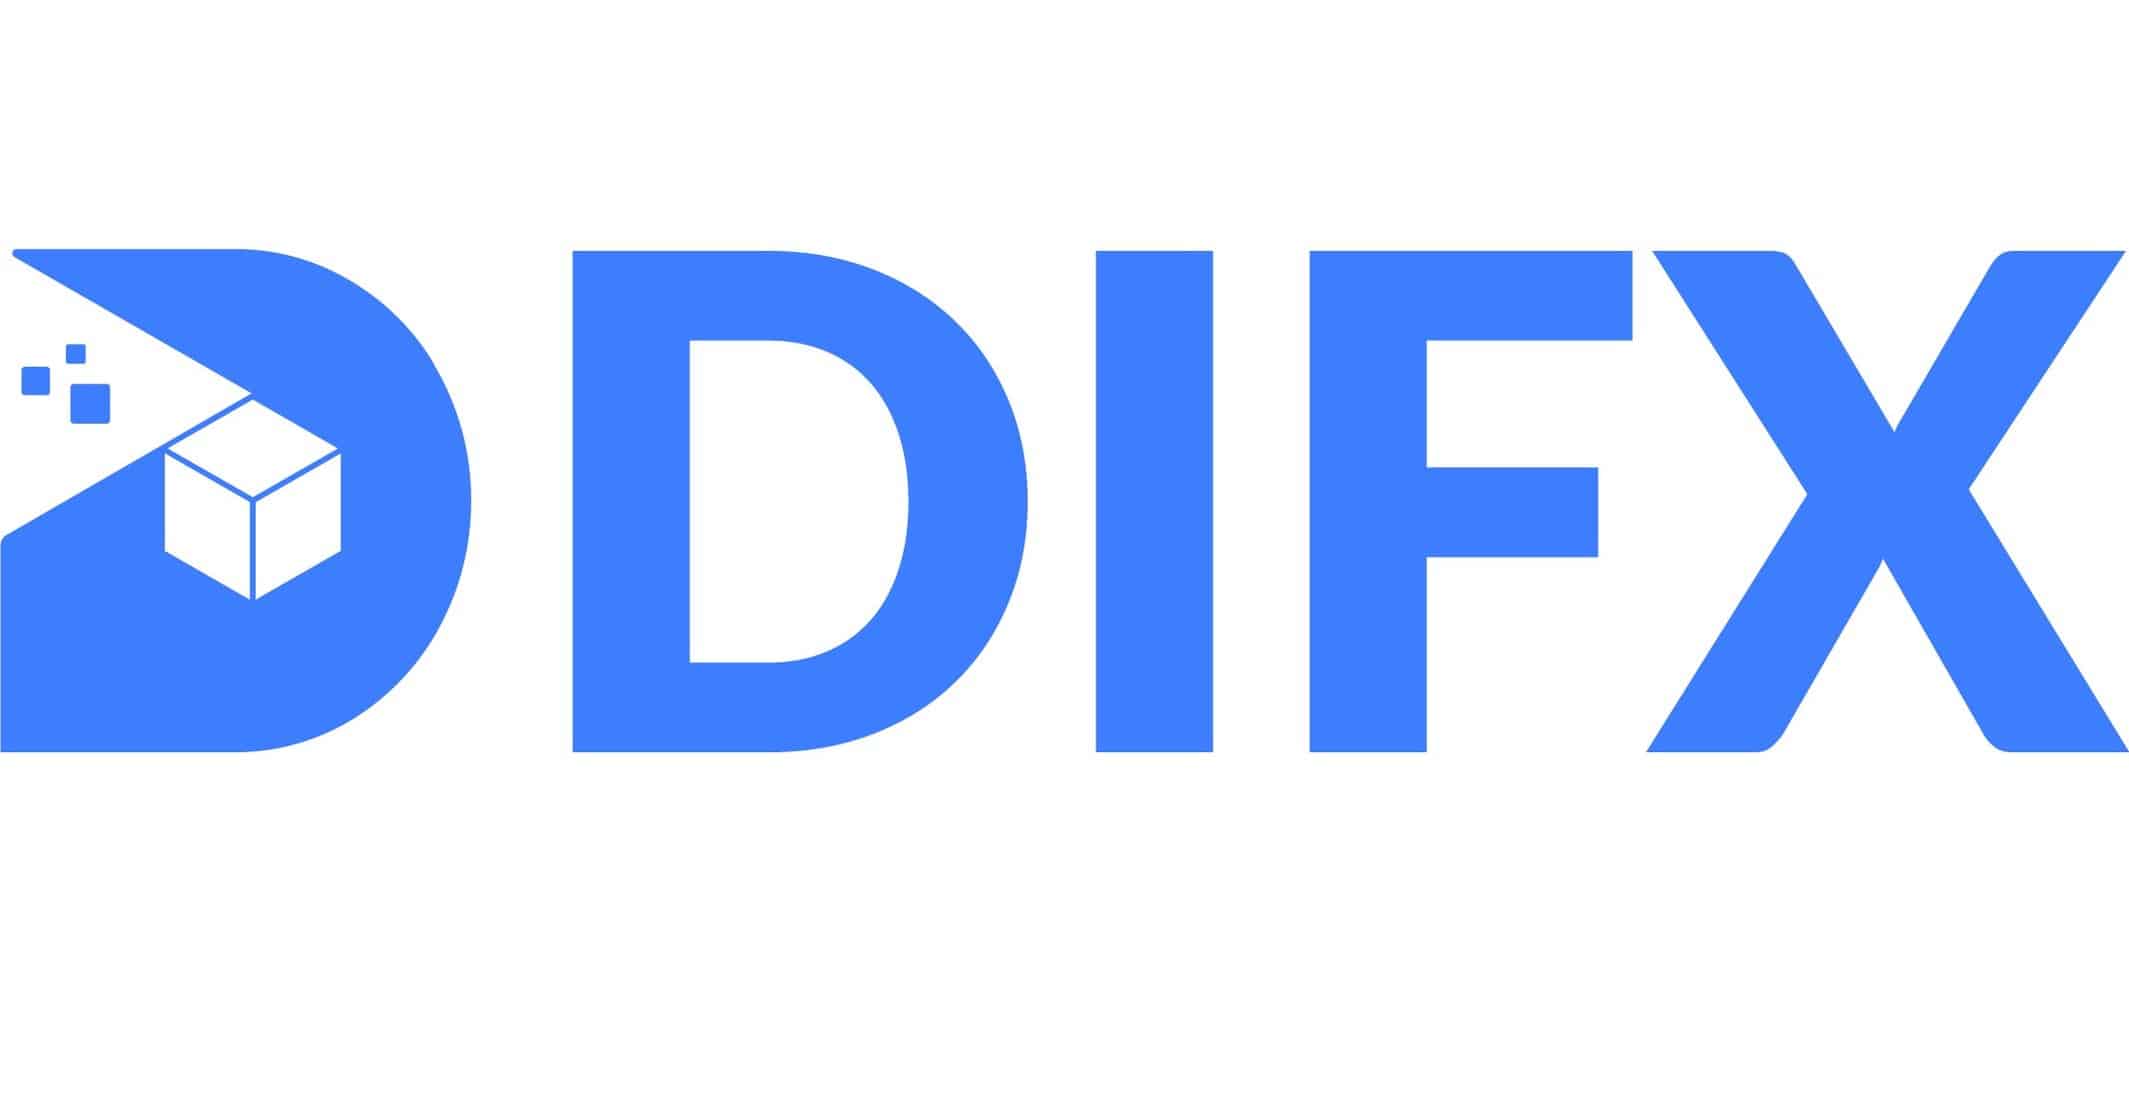 DIFX Referral Code (eb1xmx) – Get Up To 25% Off On Your Fees!